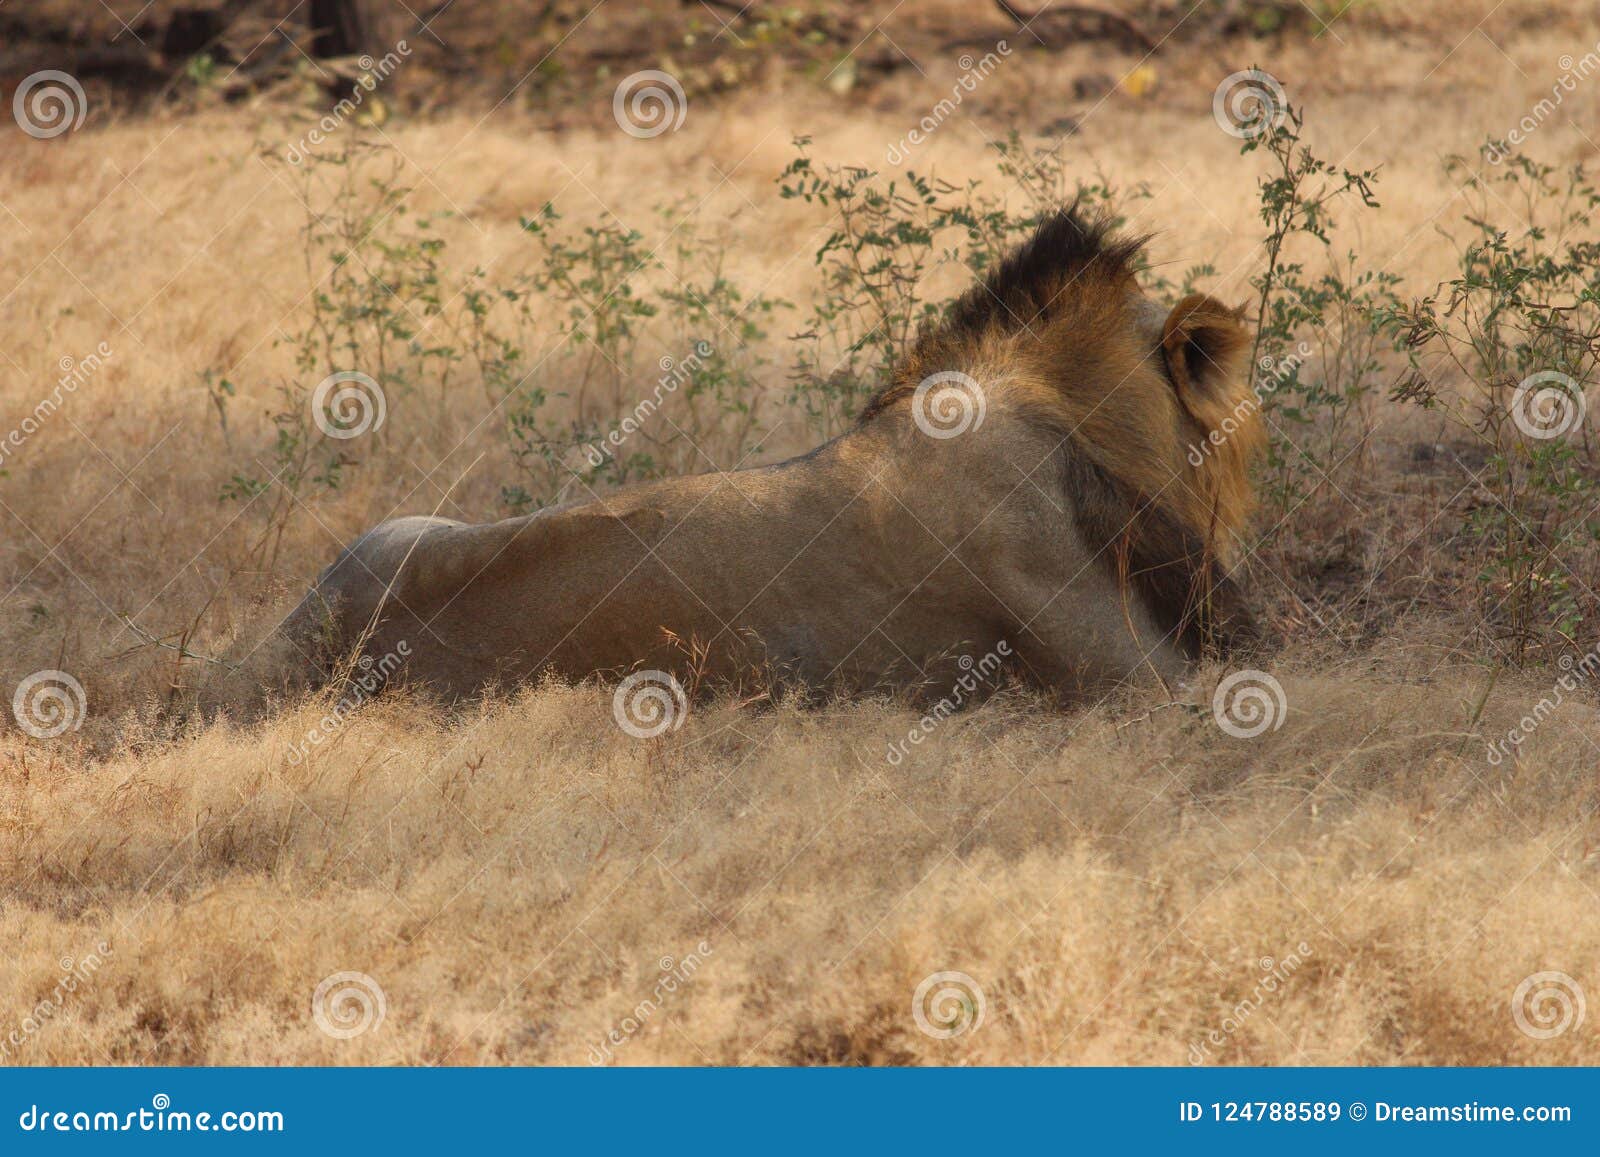 King of Animal stock image. Image of forest, reserve - 124788589